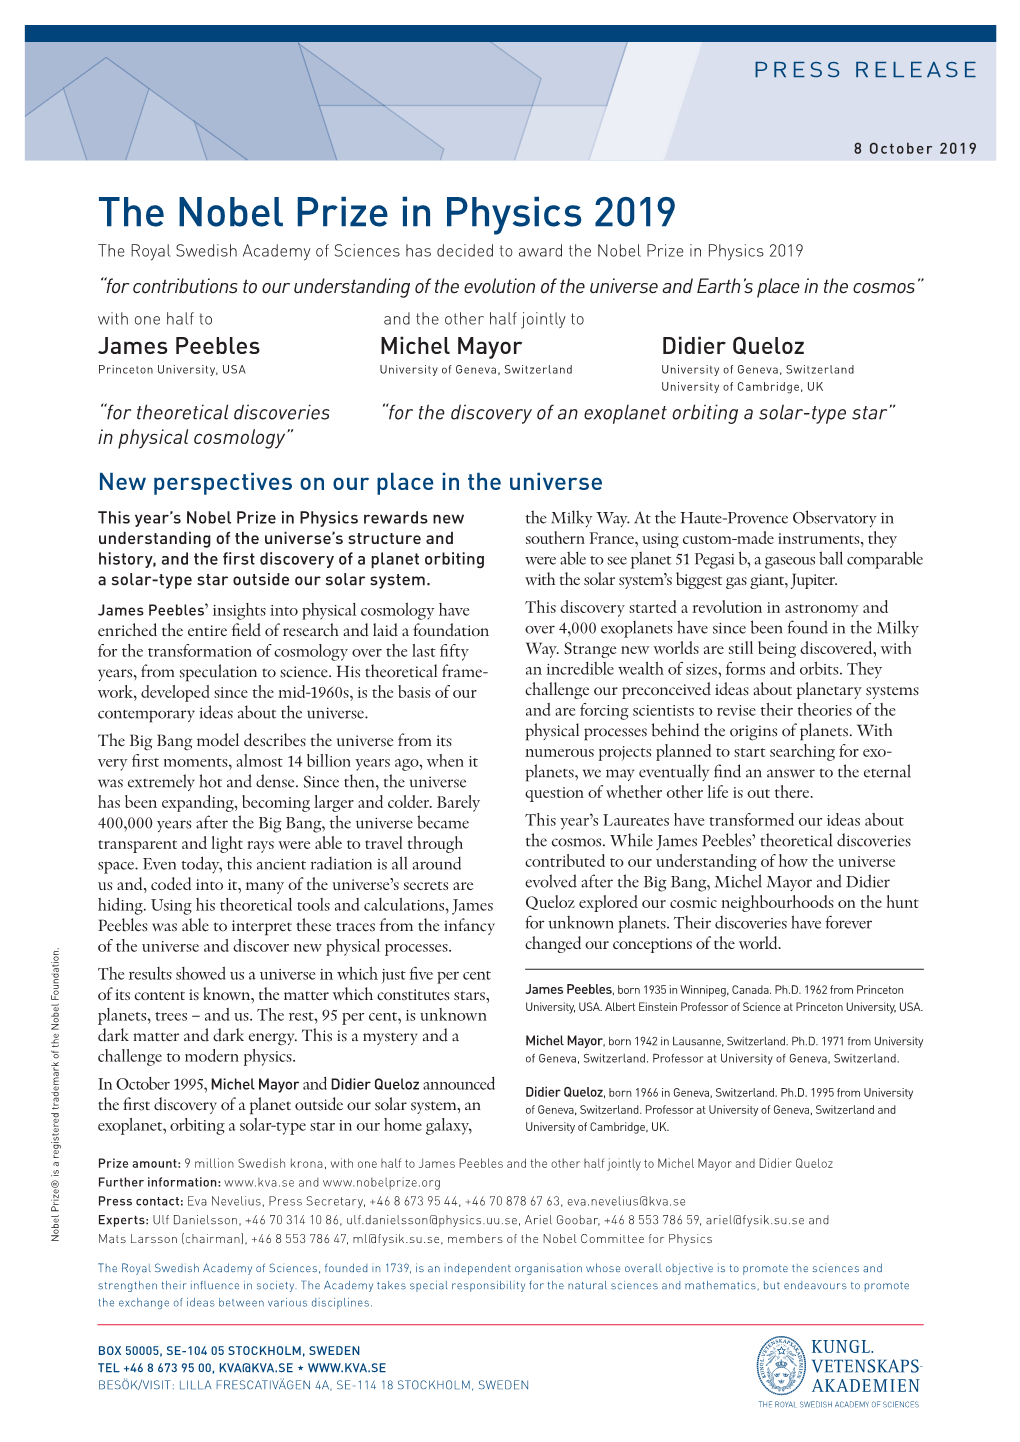 Press Release: the Nobel Prize in Physics 2019